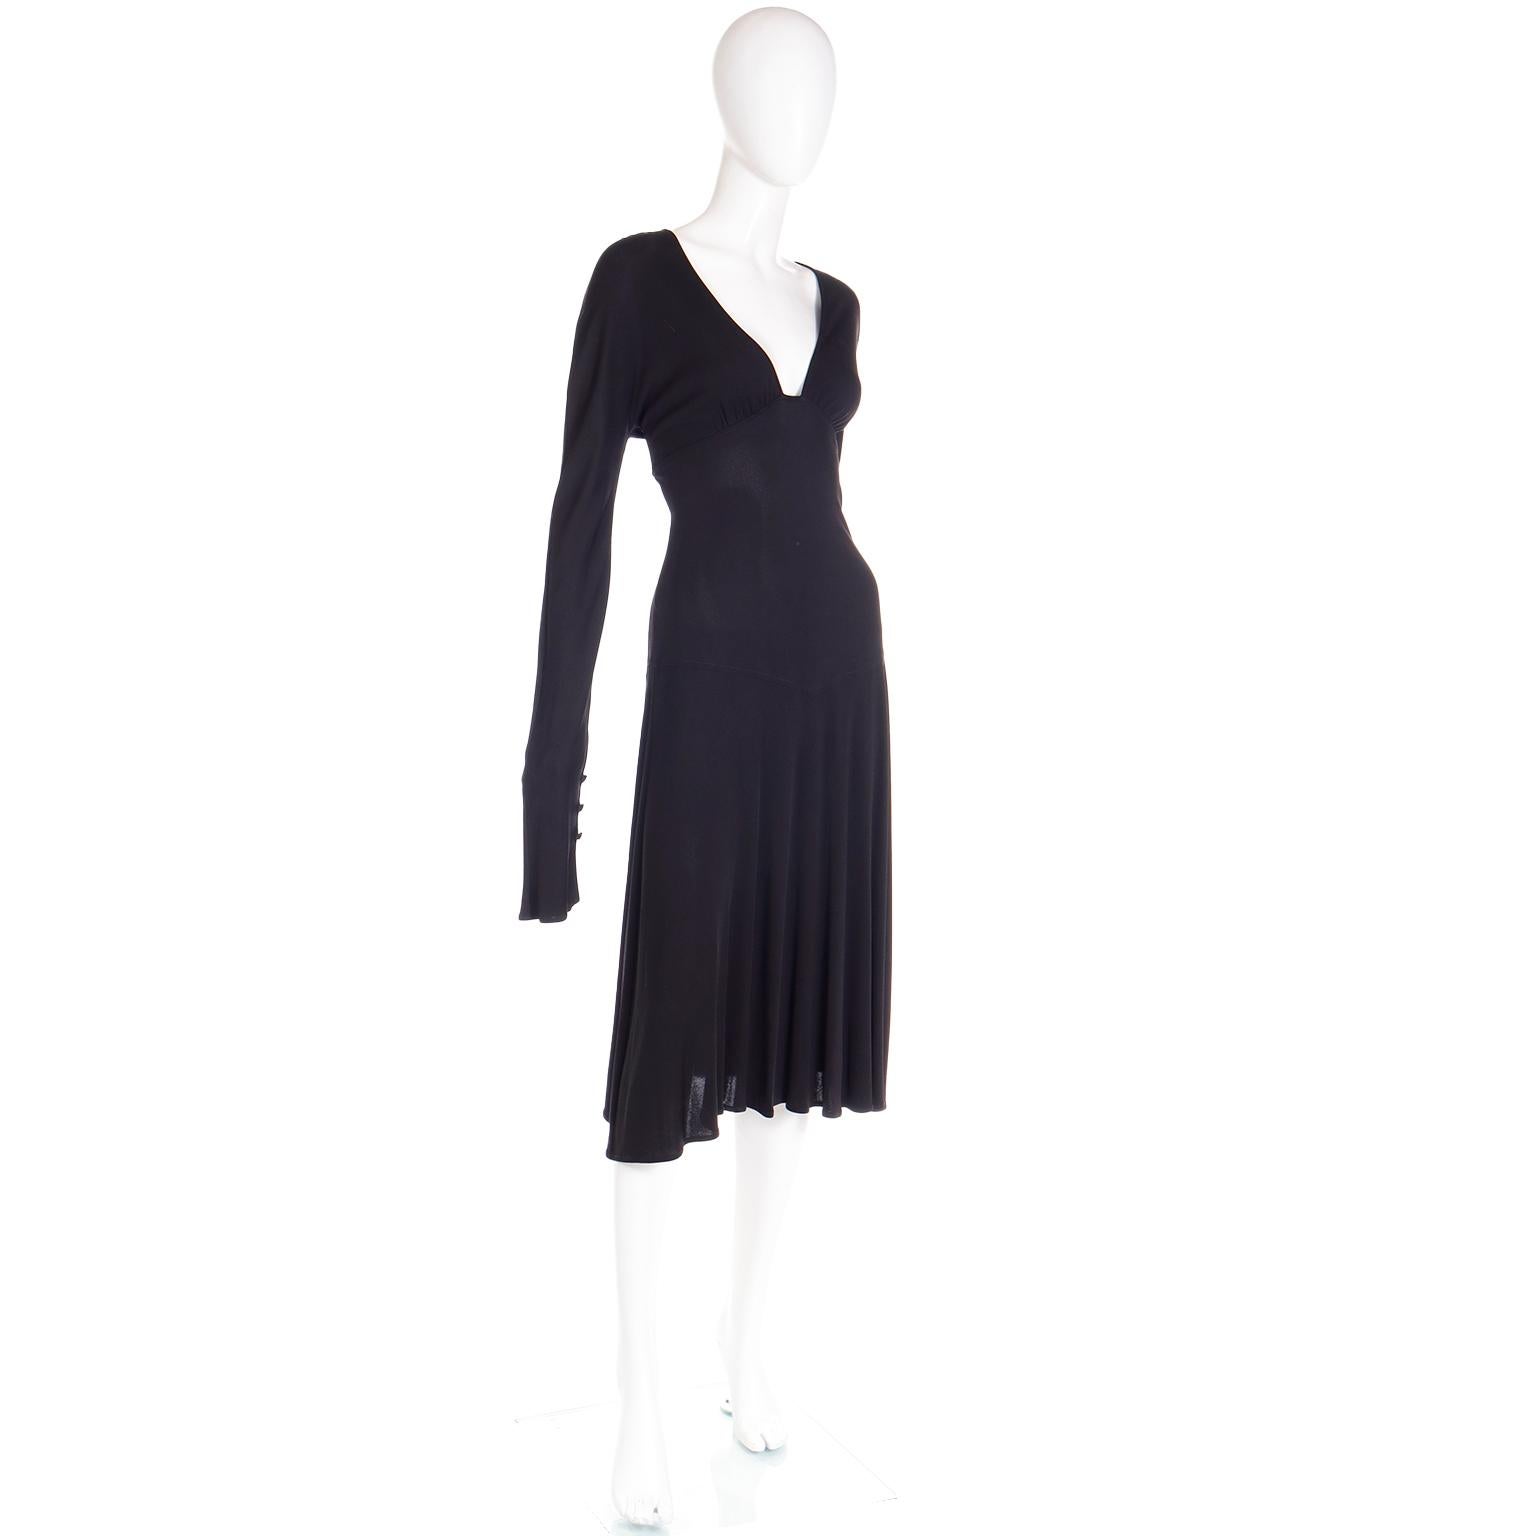 Women's F/W 2002 Gianni Versace Vintage Black Low Plunge Evening Dress Runway Documented For Sale